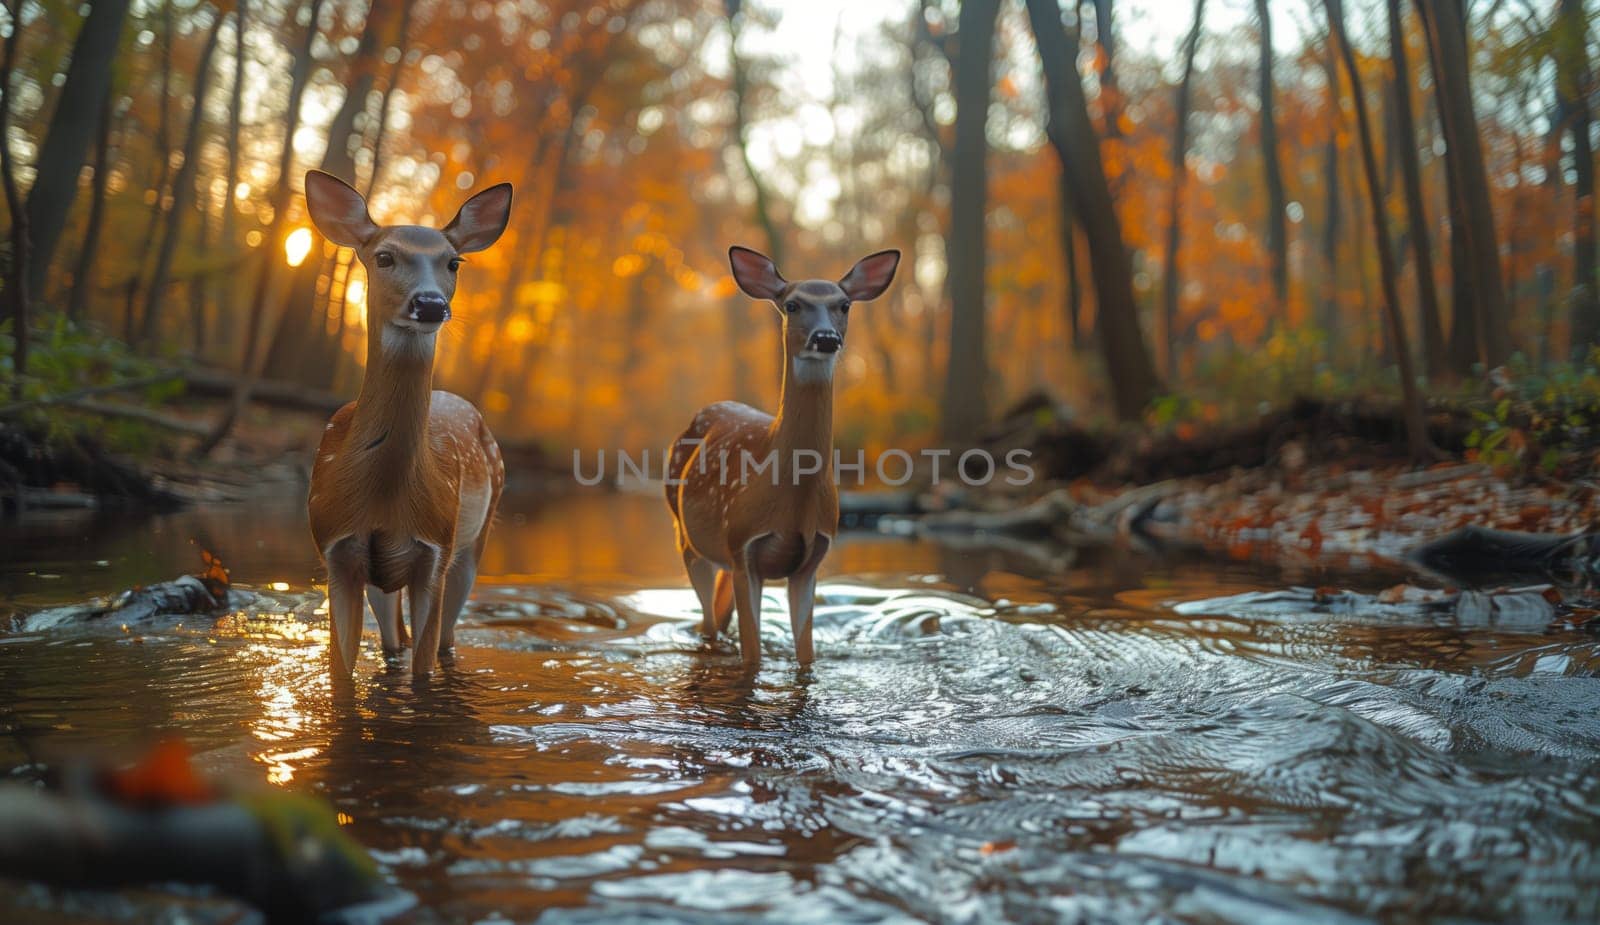 Two deer peacefully standing in a forest stream surrounded by lush green plants and trees. The serene landscape makes for a perfect painting of terrestrial animals in their natural habitat